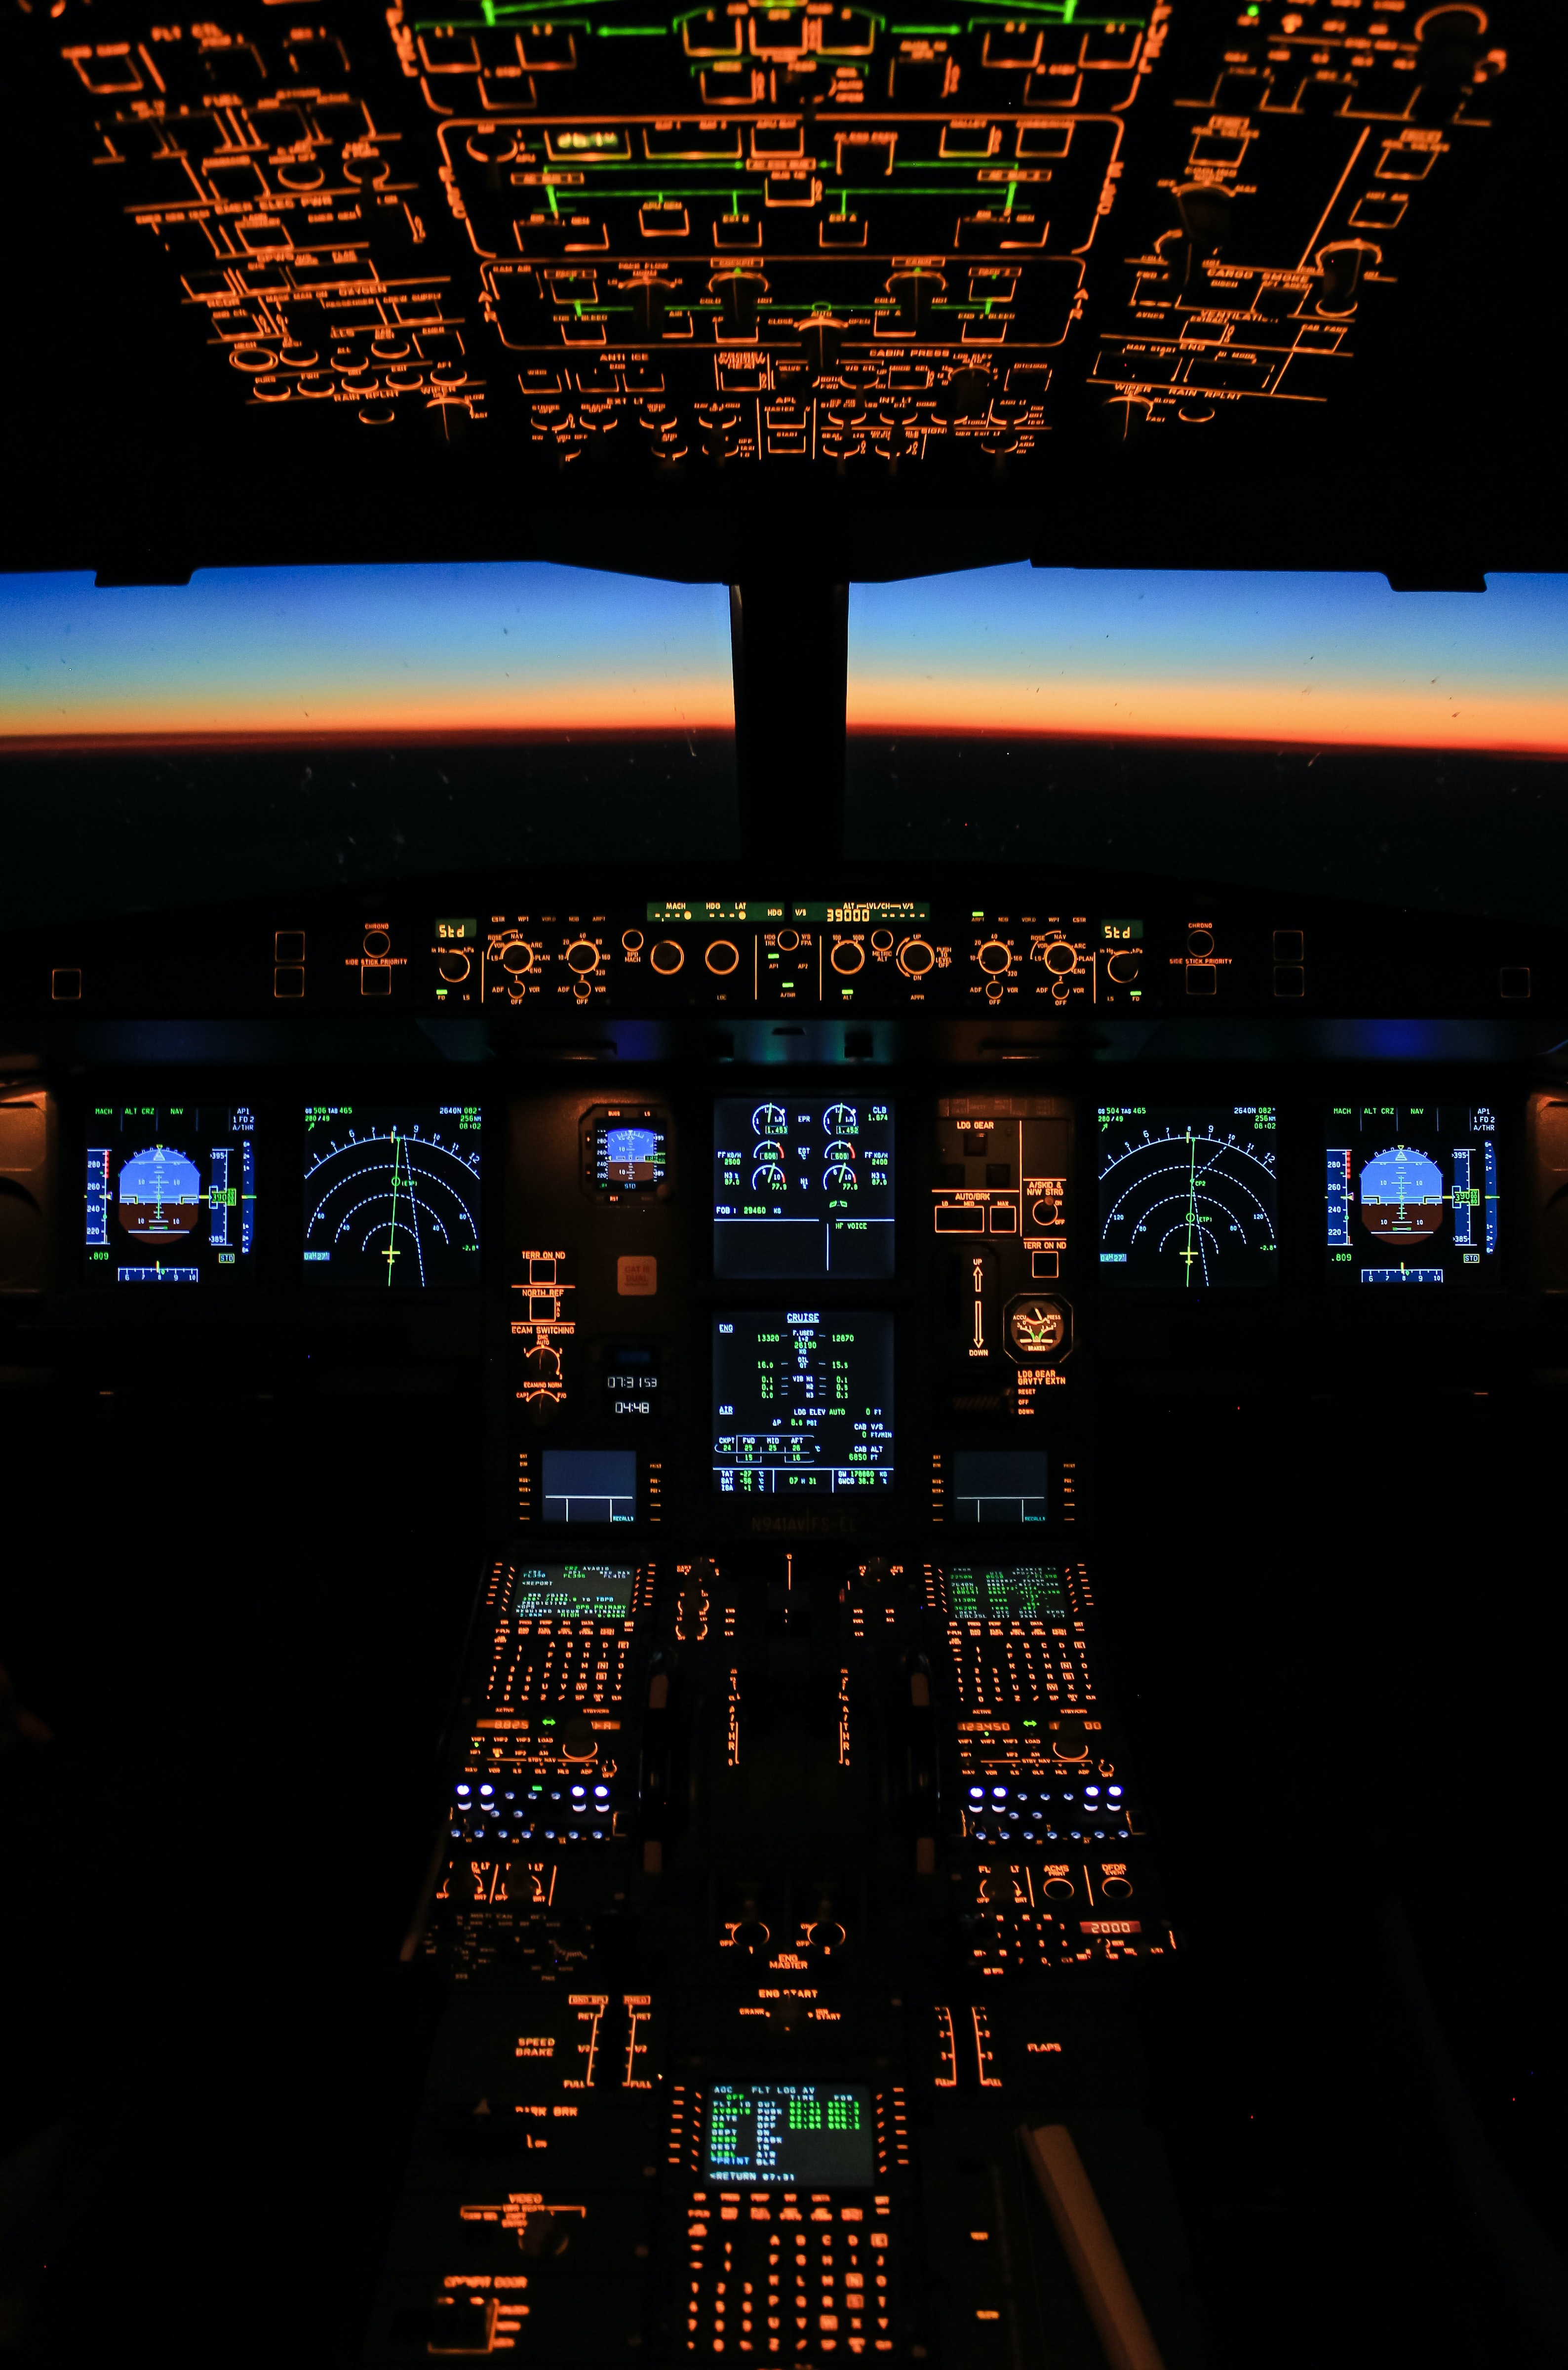 technology, airplane, plane, buttons, technologies, evening, panel, cabin, display